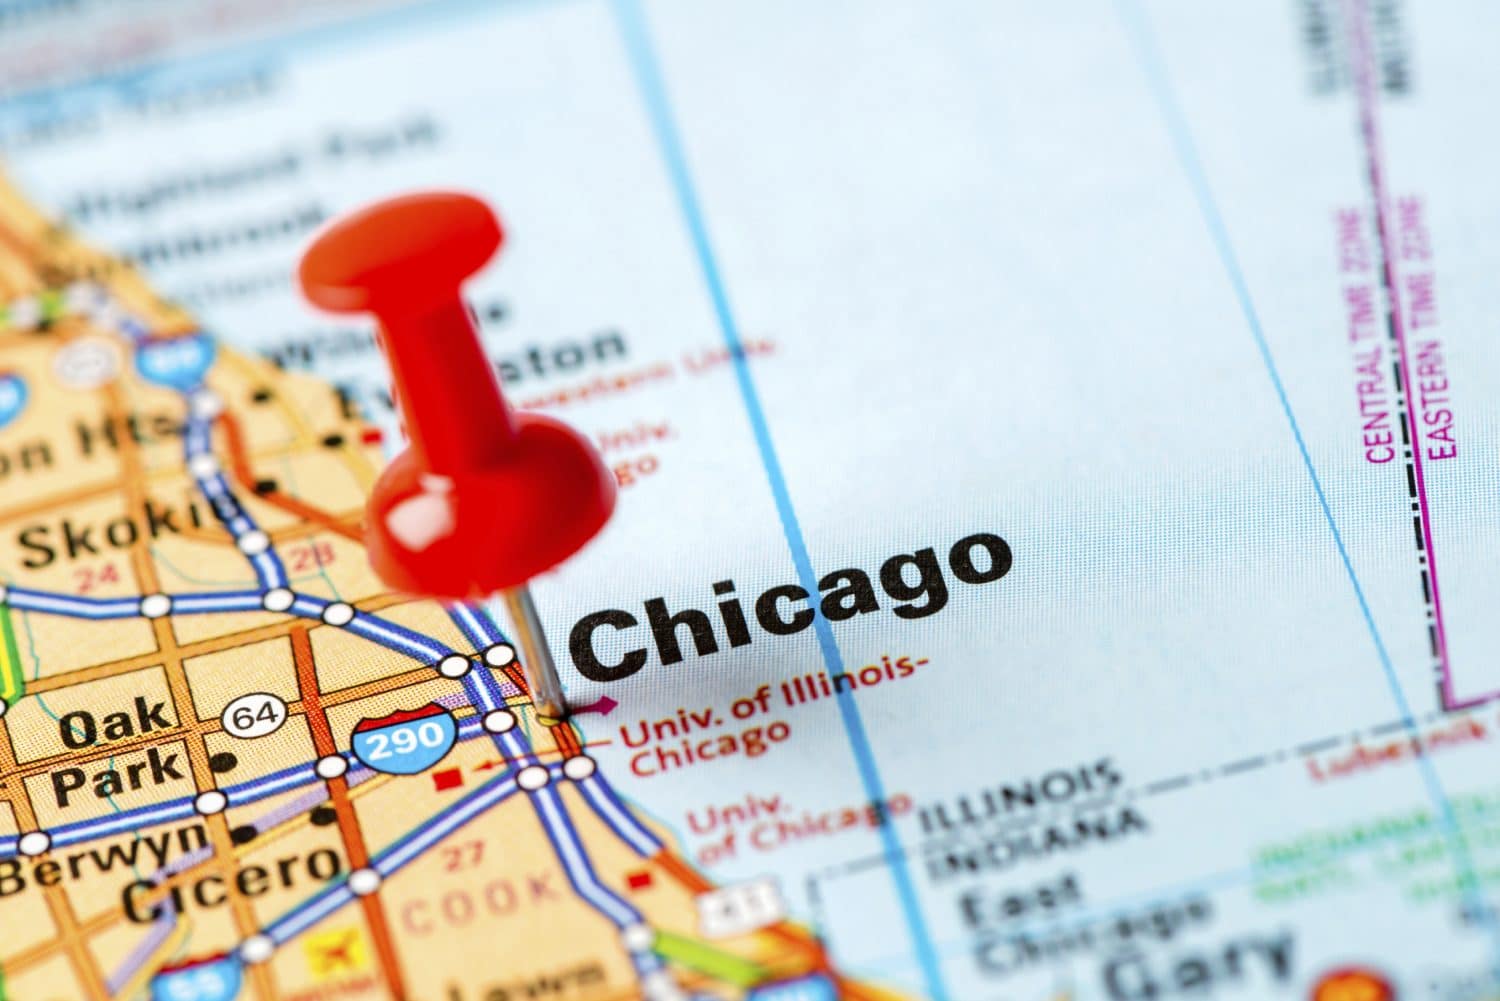 Chicago Cartography Image